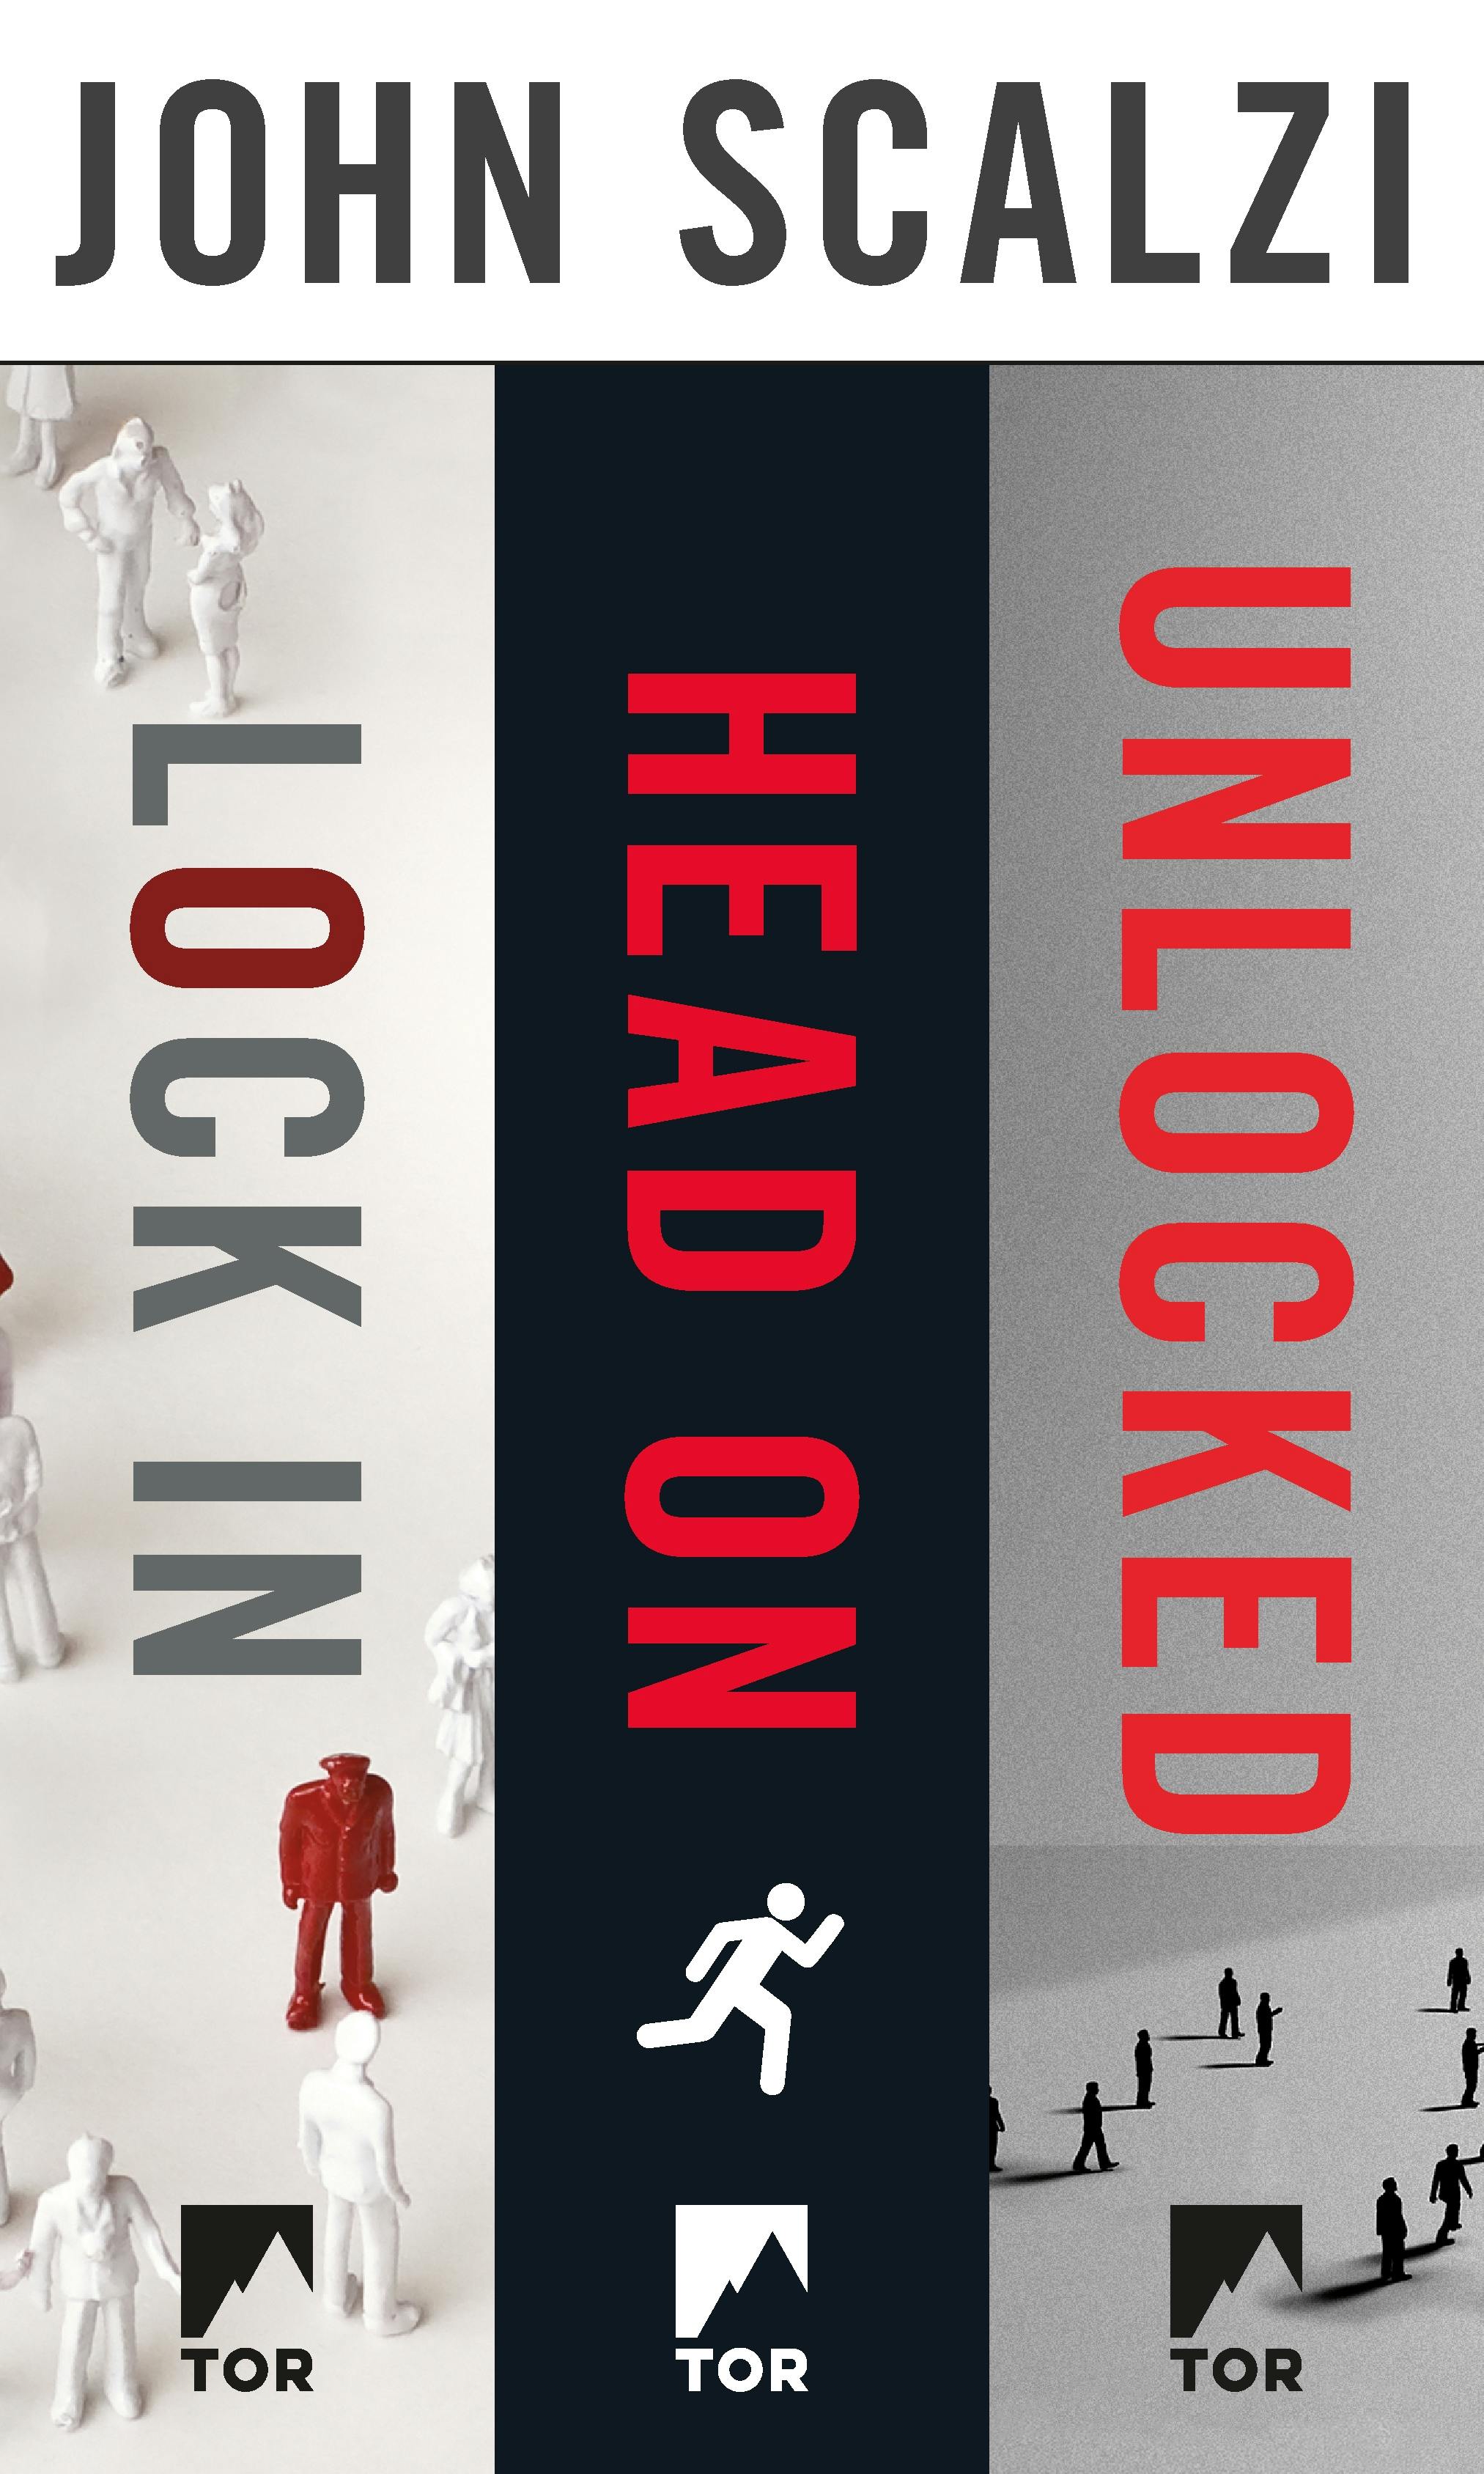 Cover for the book titled as: The Lock In Series